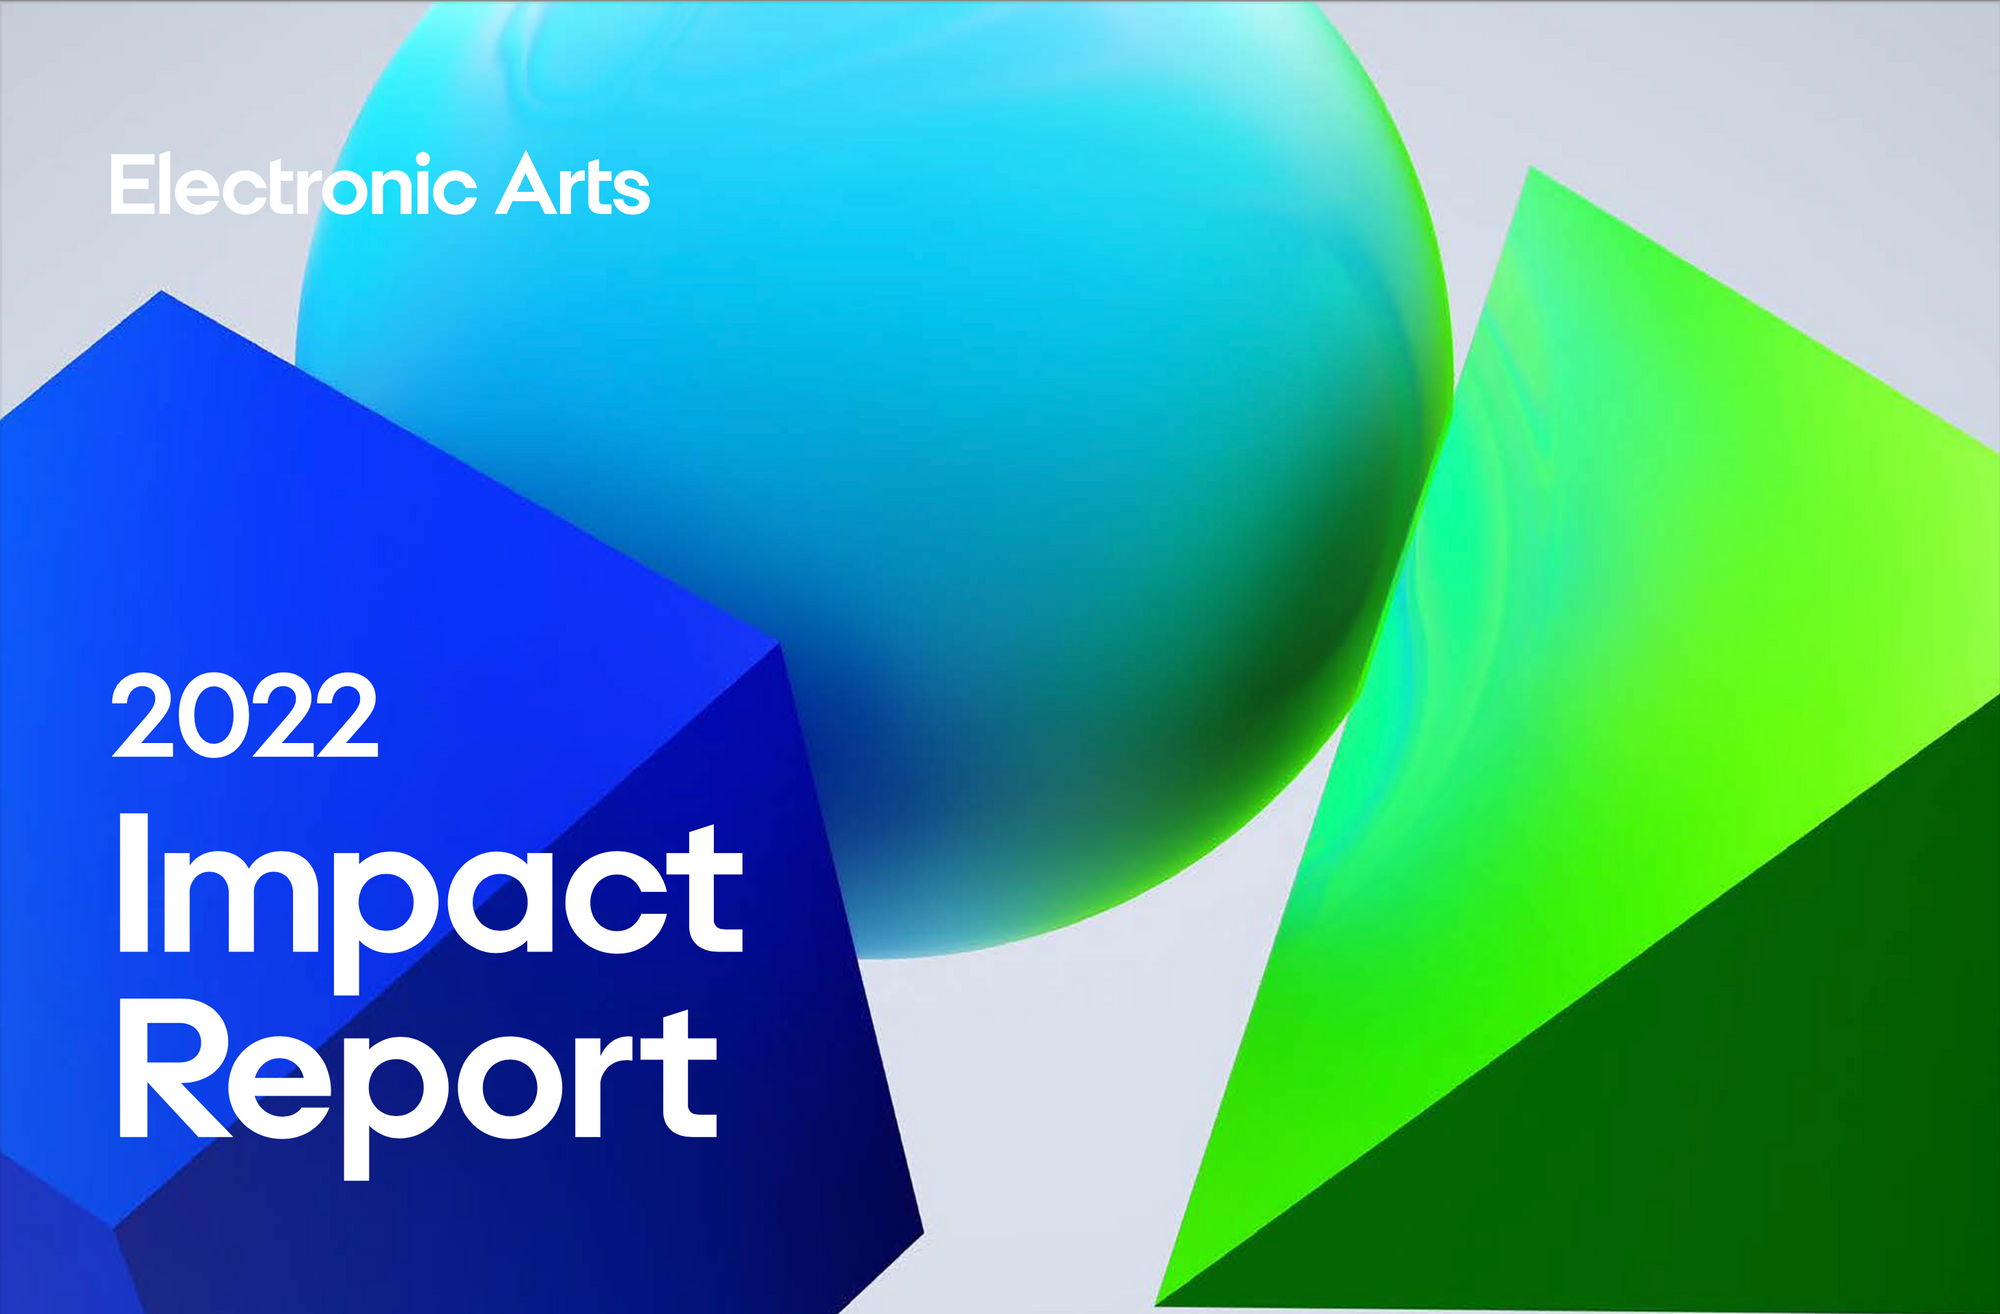 The cover image from EA's 2022 impact report, showing rendered coloured shapes – blue, green, turquoise